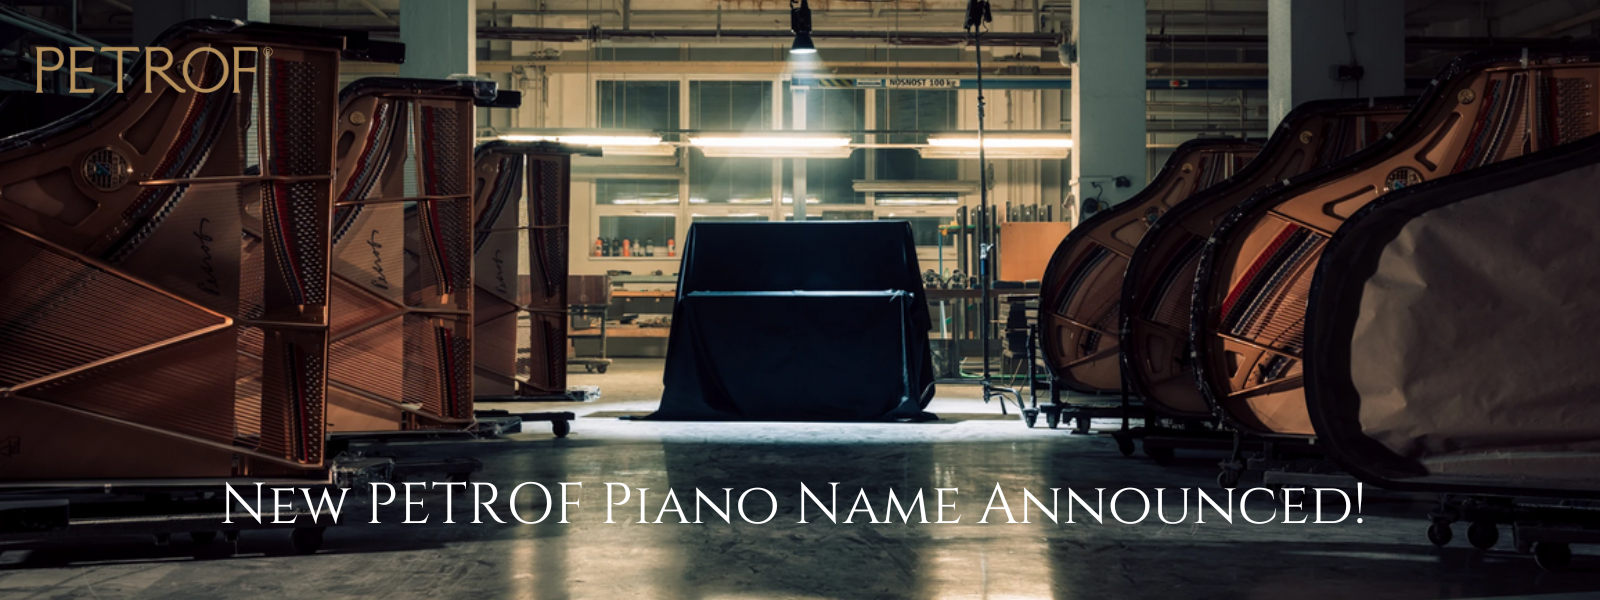 THE PIANO PLACE - 1307 E Maple Rd, Troy, Michigan - Musical